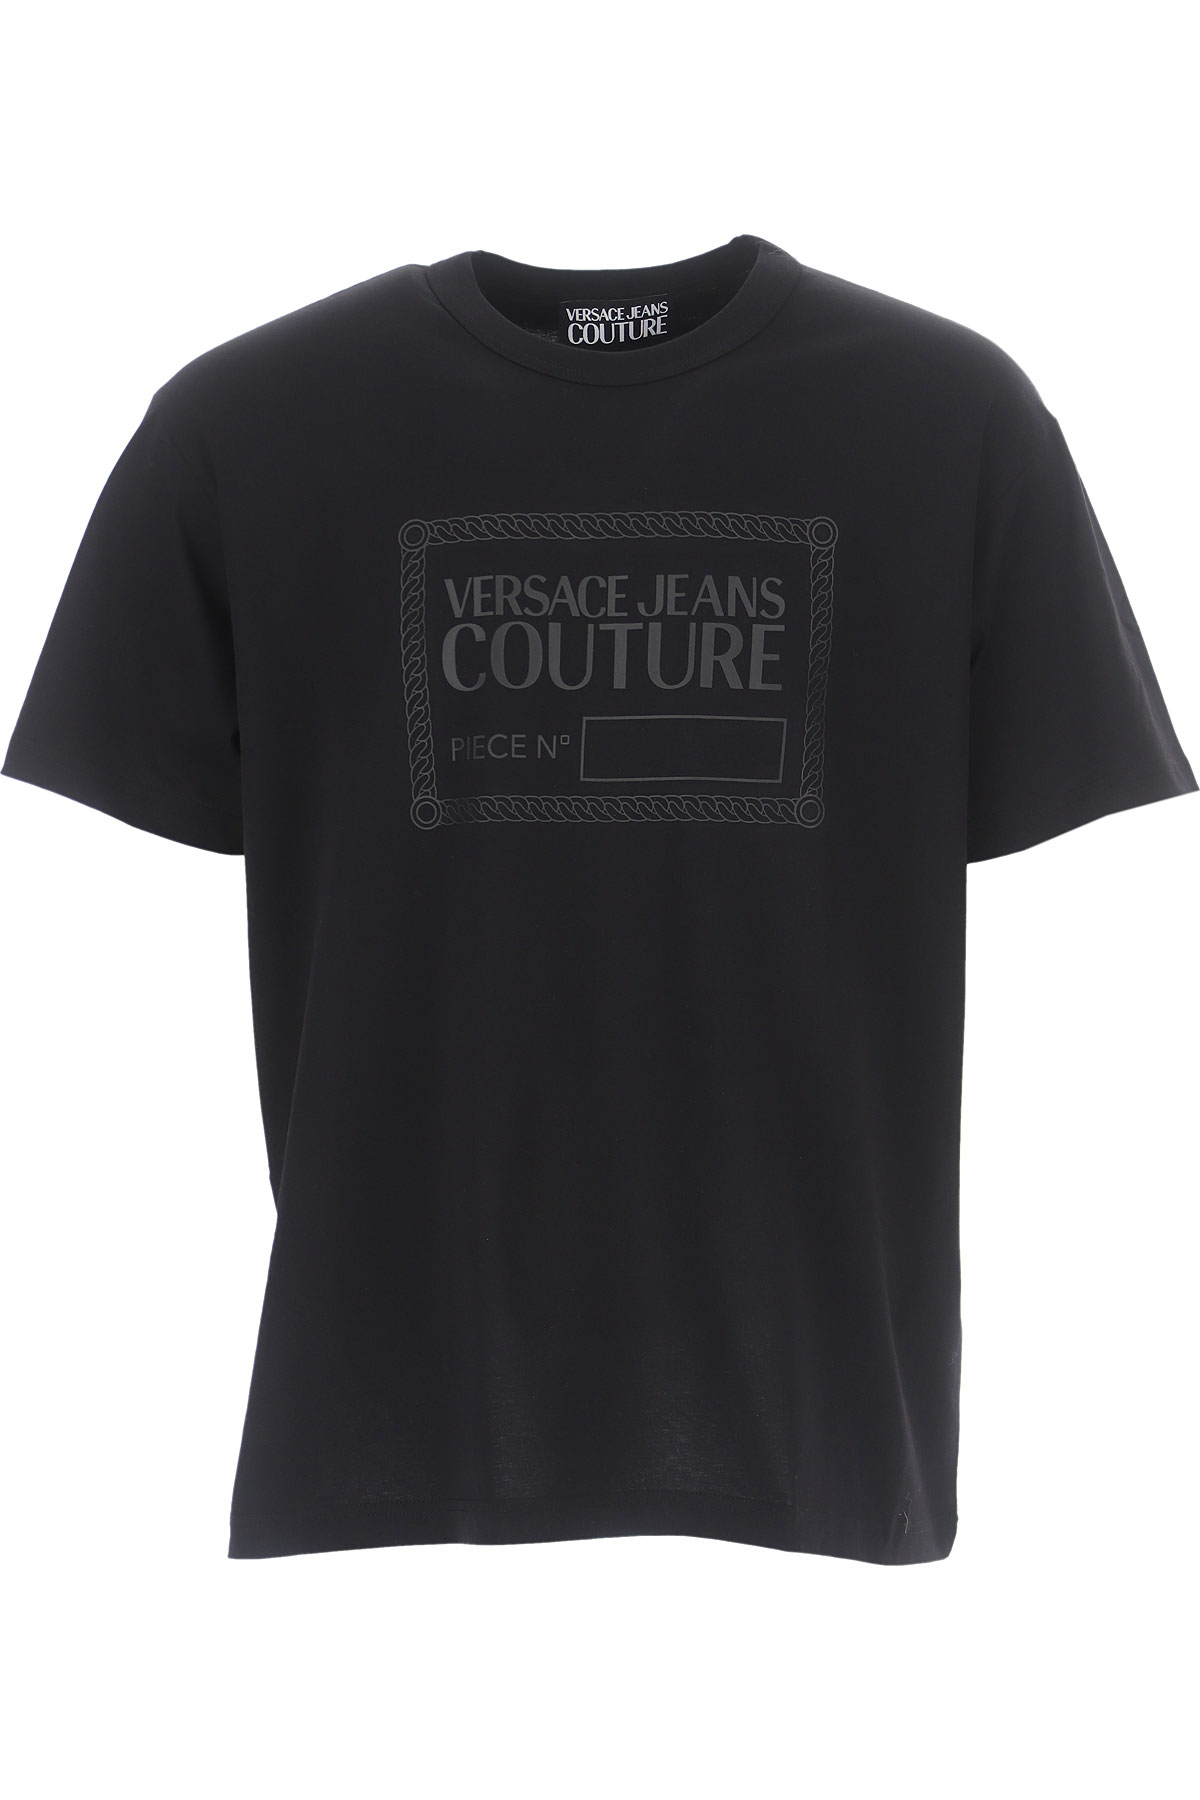 Mens Clothing Versace Jeans Couture , Style code: CONT-71gaht13-cj00t